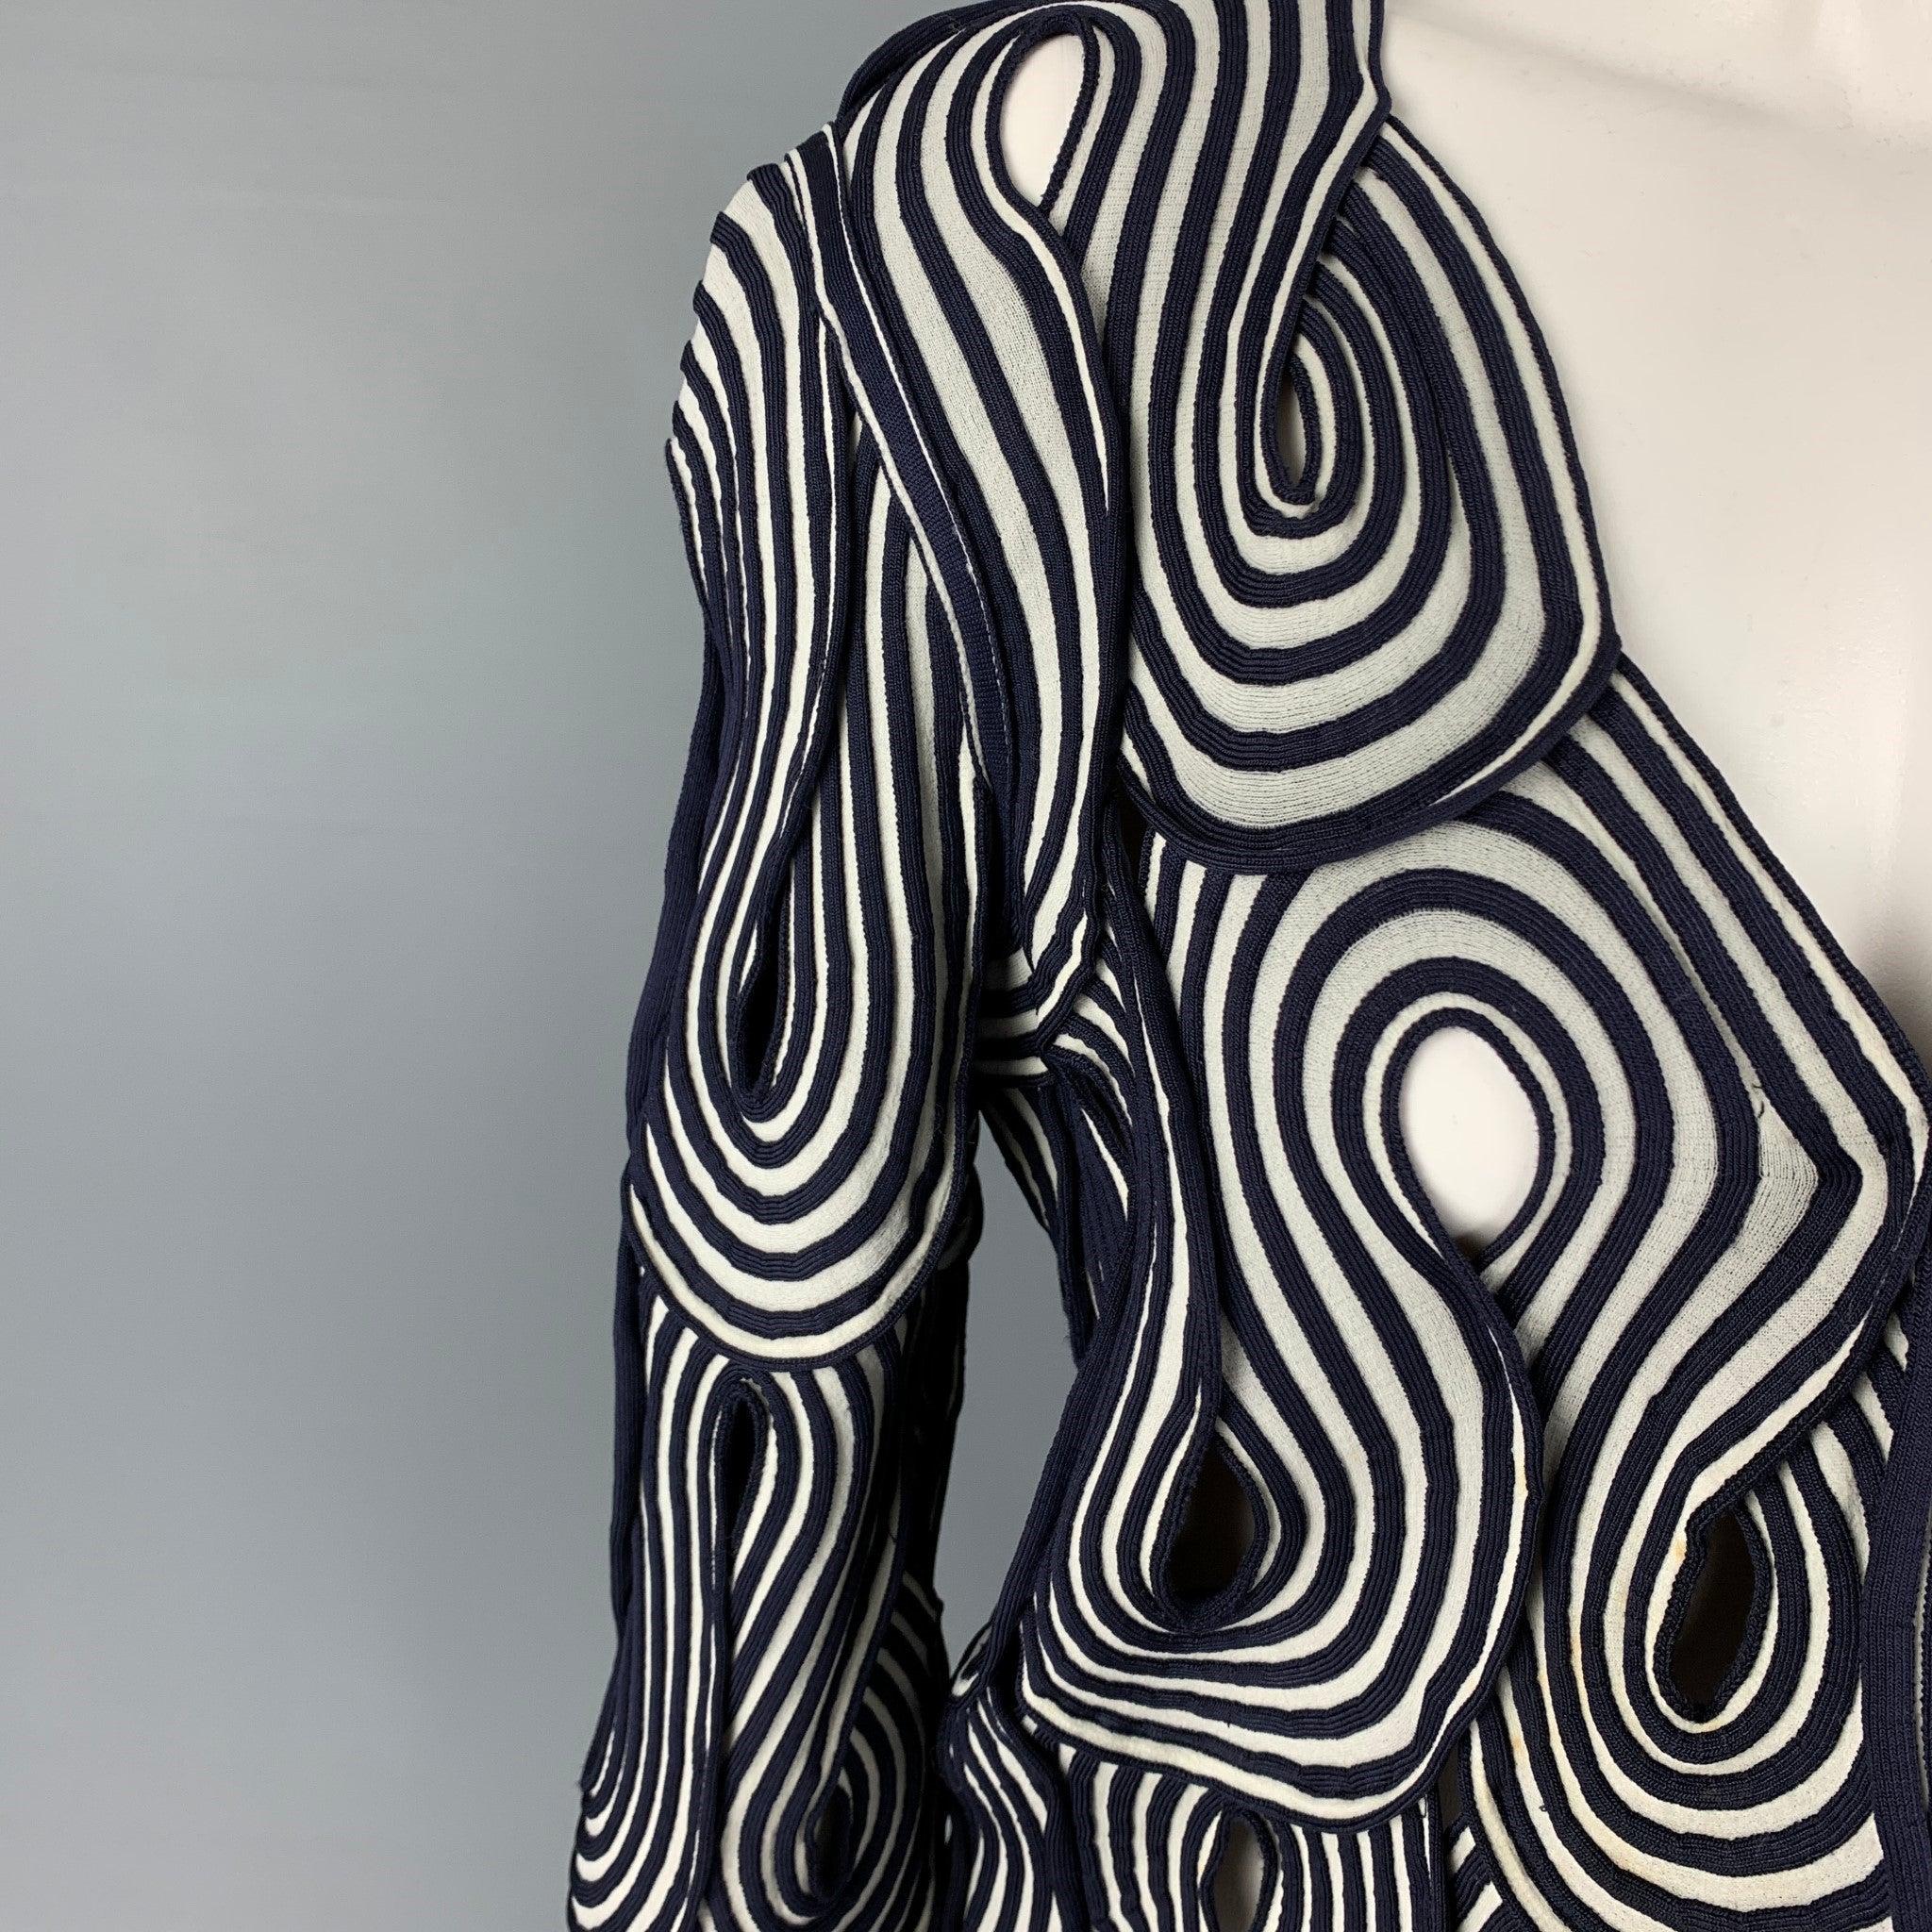 GIORGIO ARMANI jacket comes in a purple & white swirl print viscose / polyamide featuring long sleeves and a single button closure. Made in Italy.
Very Good
Pre-Owned Condition. 

Marked:   40 

Measurements: 
 
Shoulder: 16 inches Bust: 34 inches